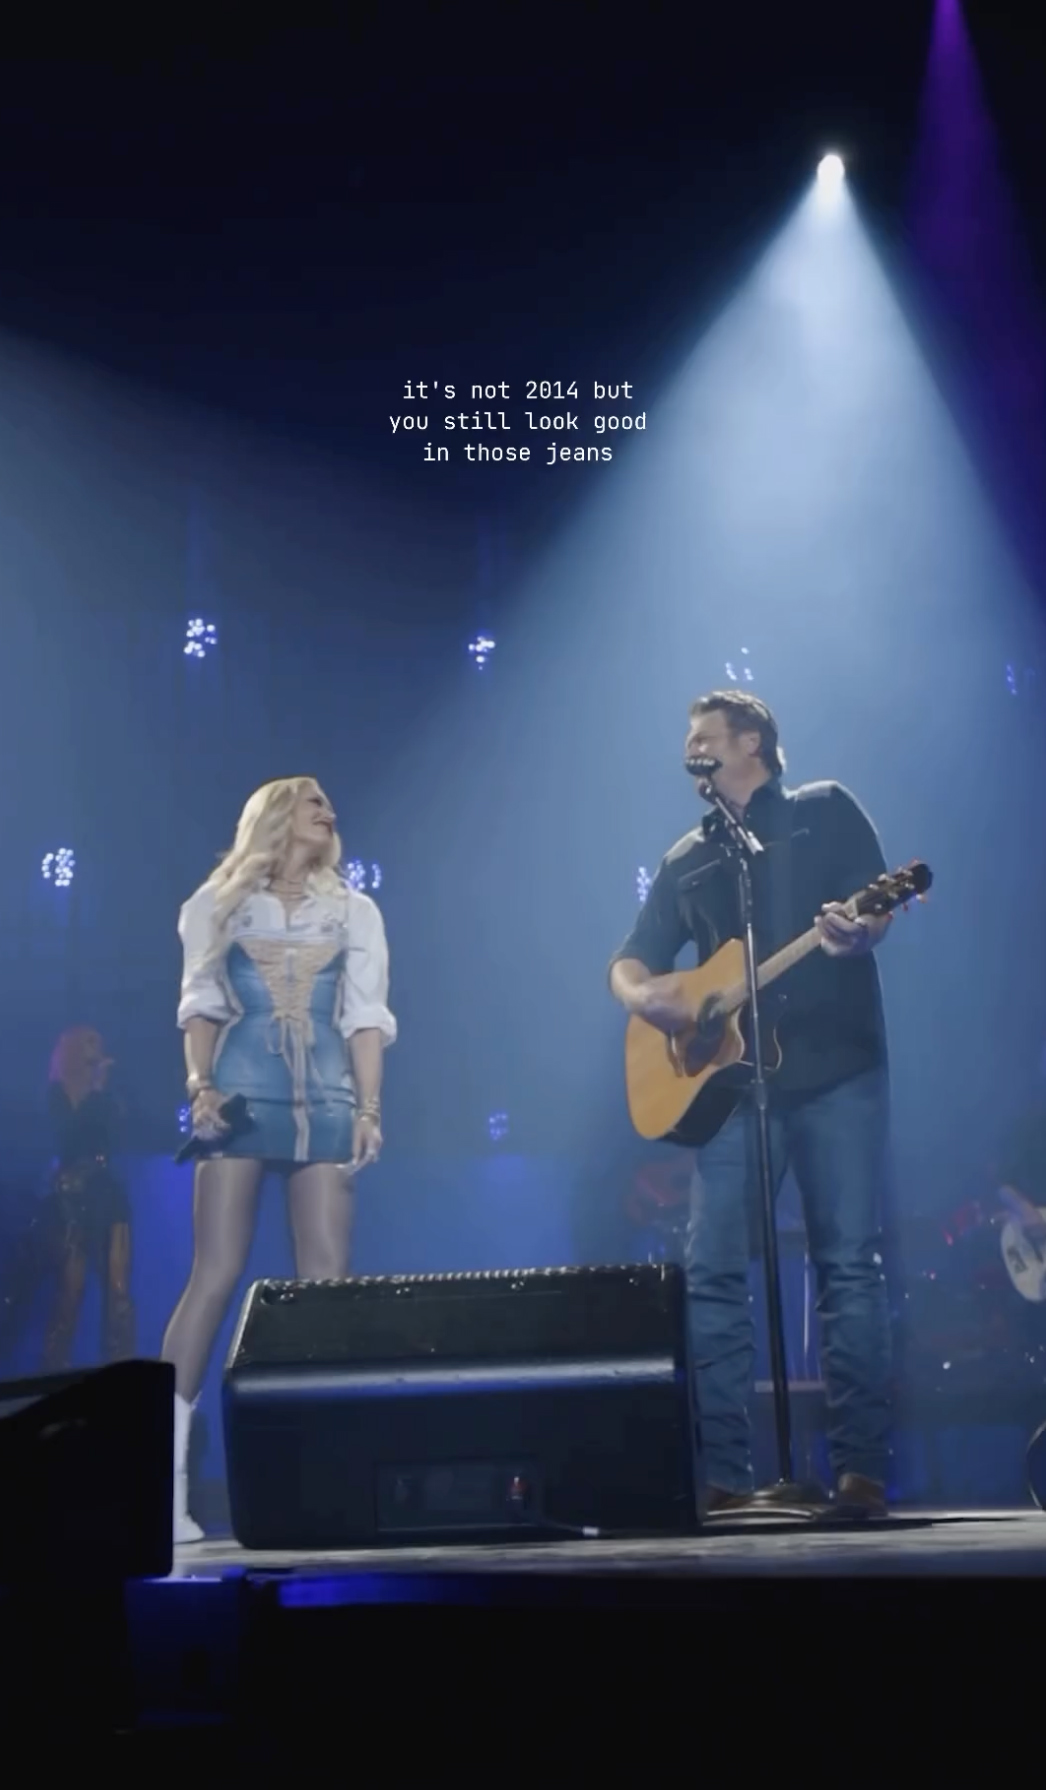 Blake and Gwen performed their song, Purple Irises, in front of the audience